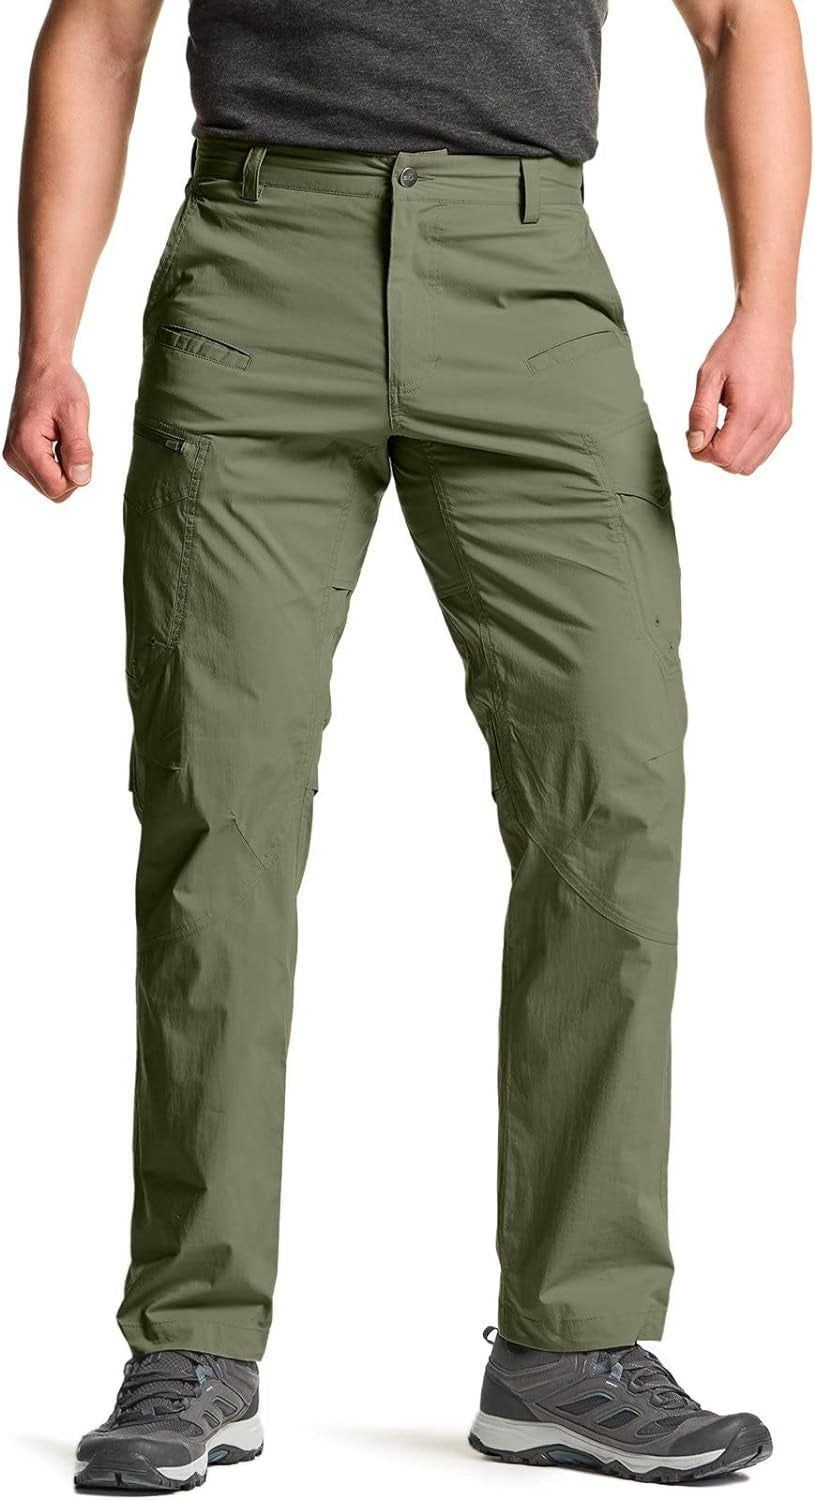 Men's Quick Dry Tactical Pants, Water Resistant Outdoor Pants, Lightweight Stretch Cargo/Straight Work Hiking Pants